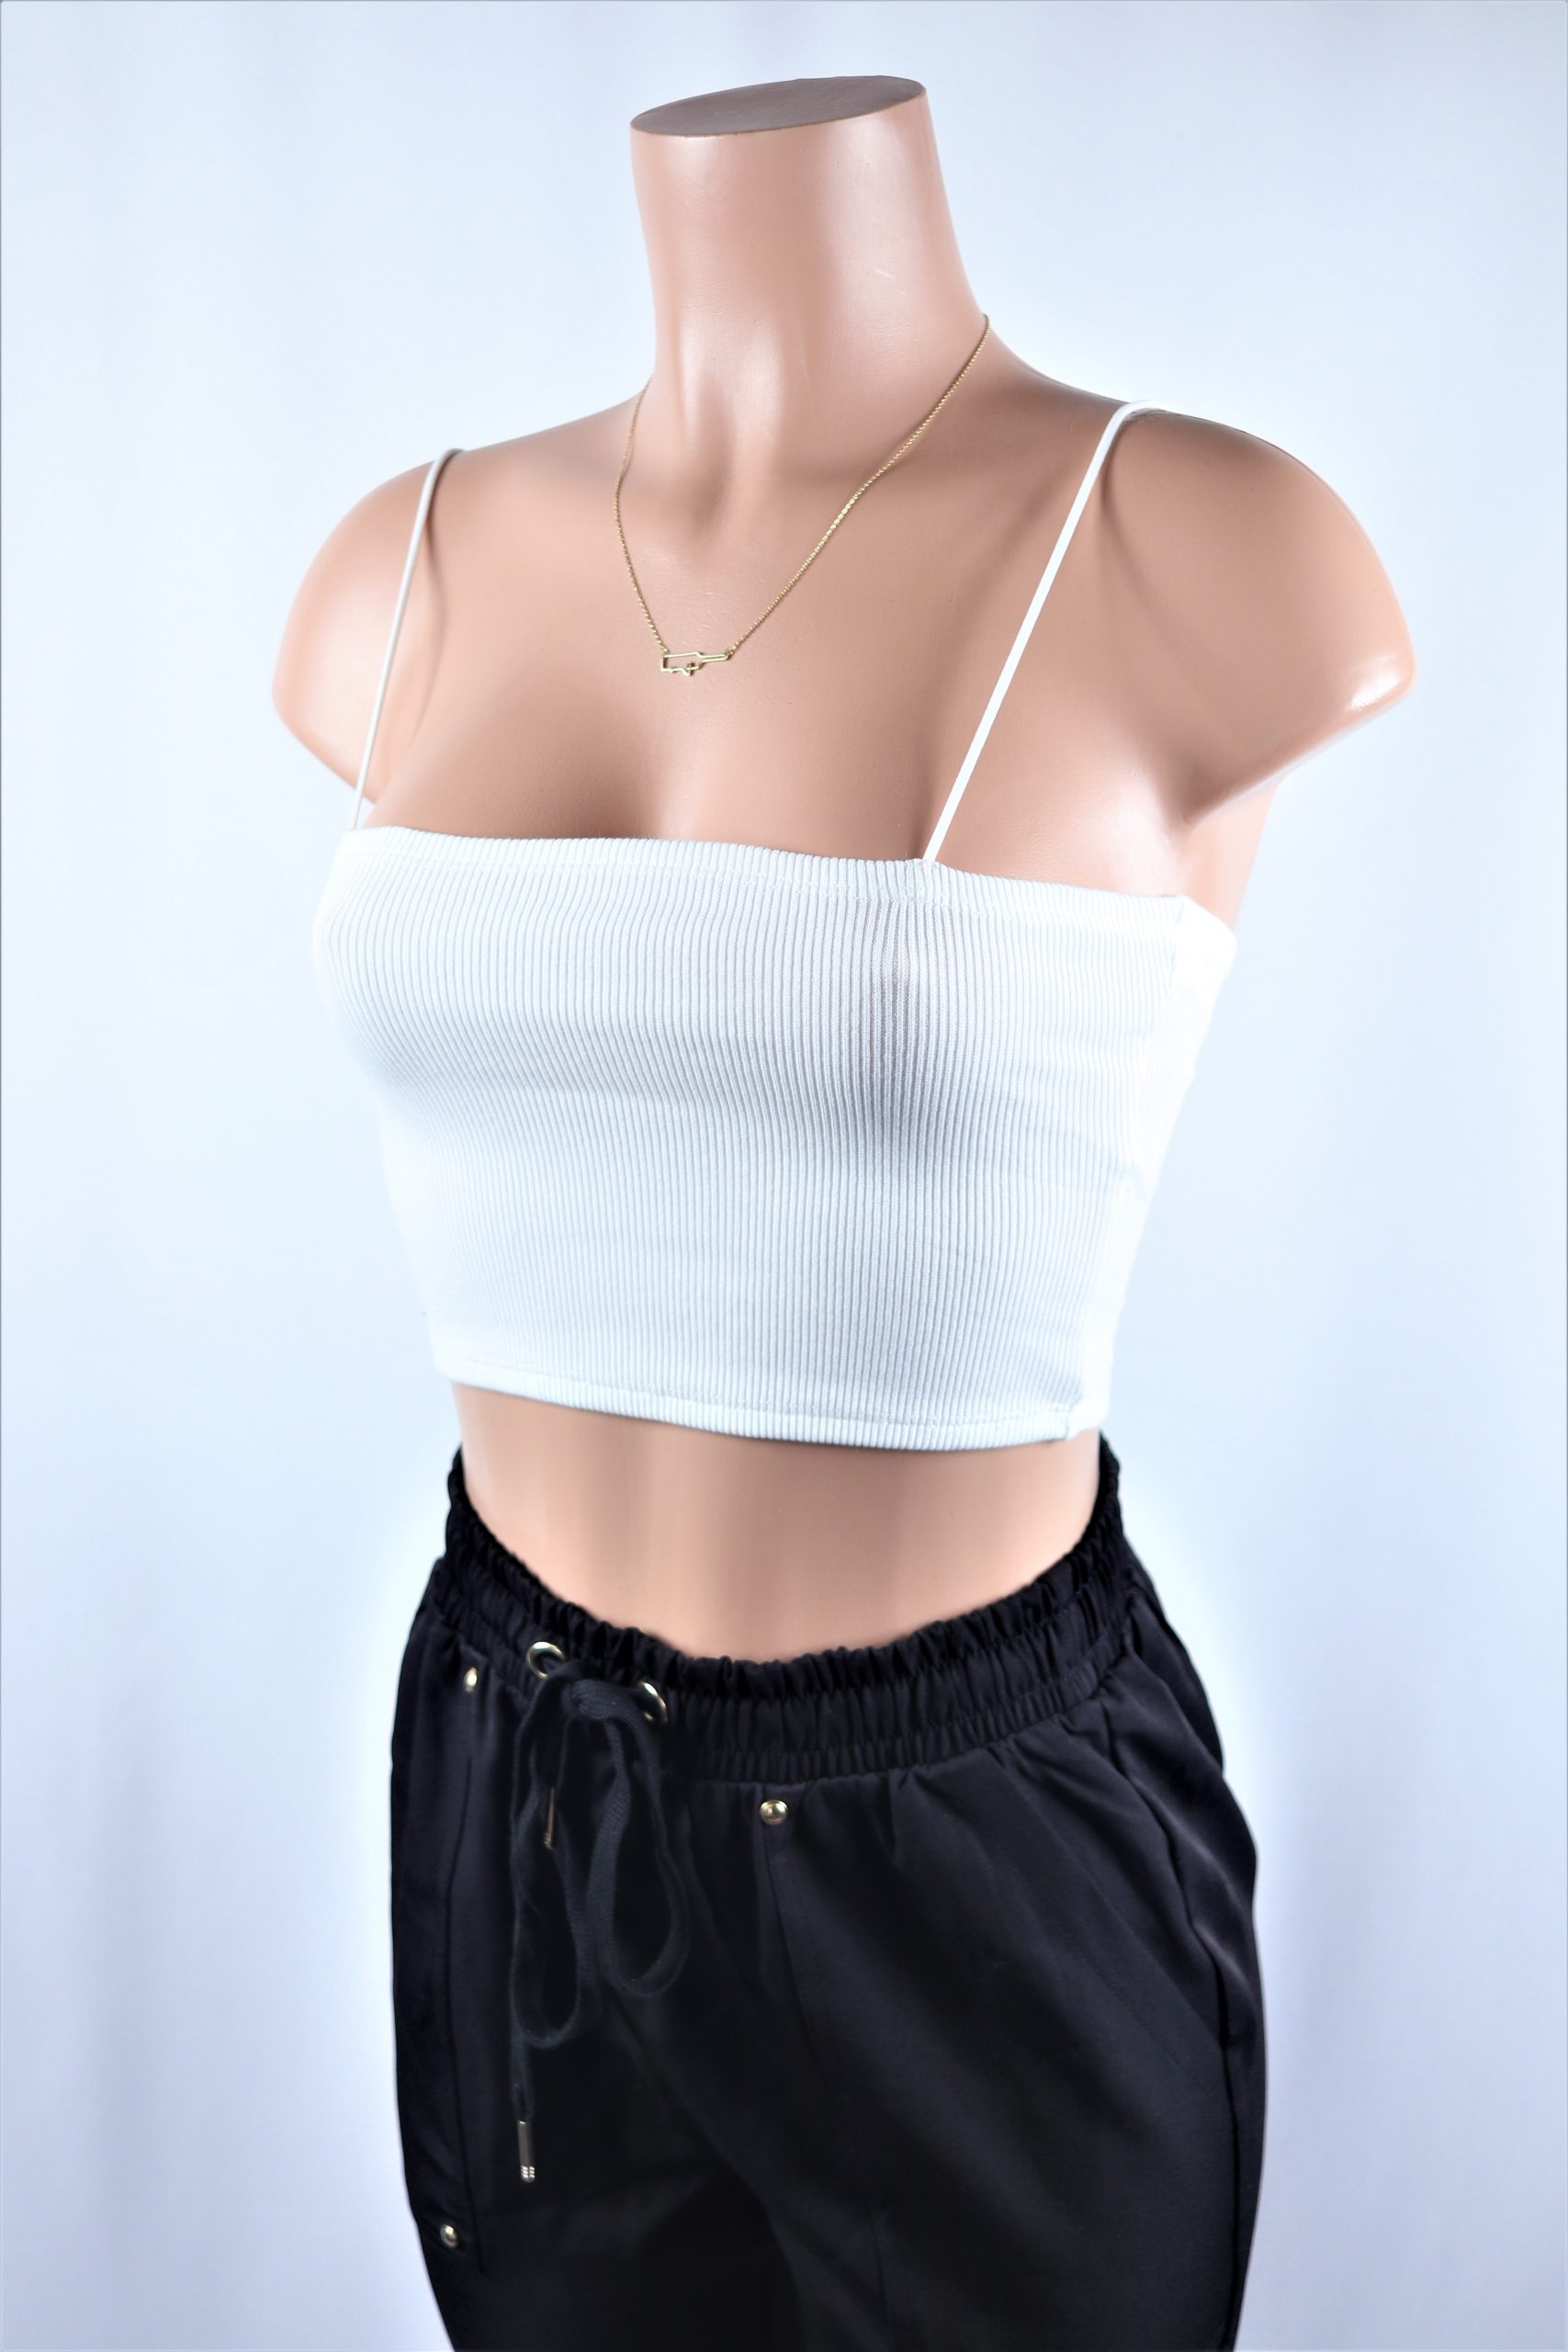 Another Basic Crop Top - NeedMyStyle